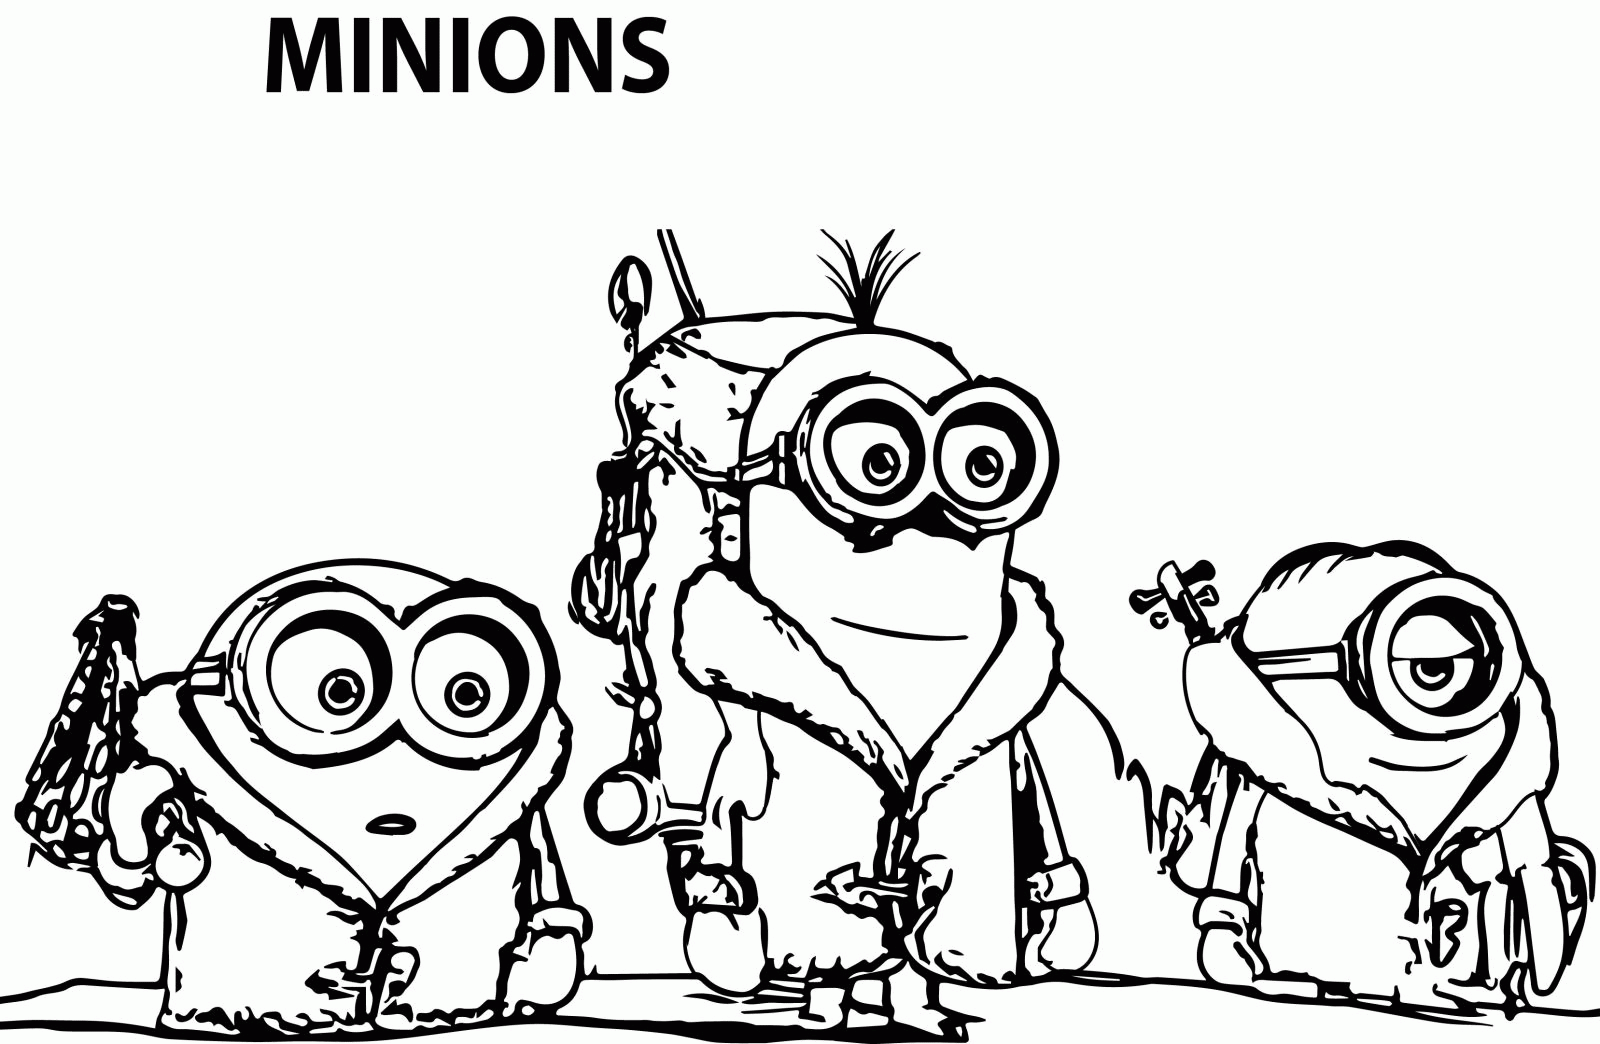 Minions The Movie Coloring Page | Coloring Pages For All Ages